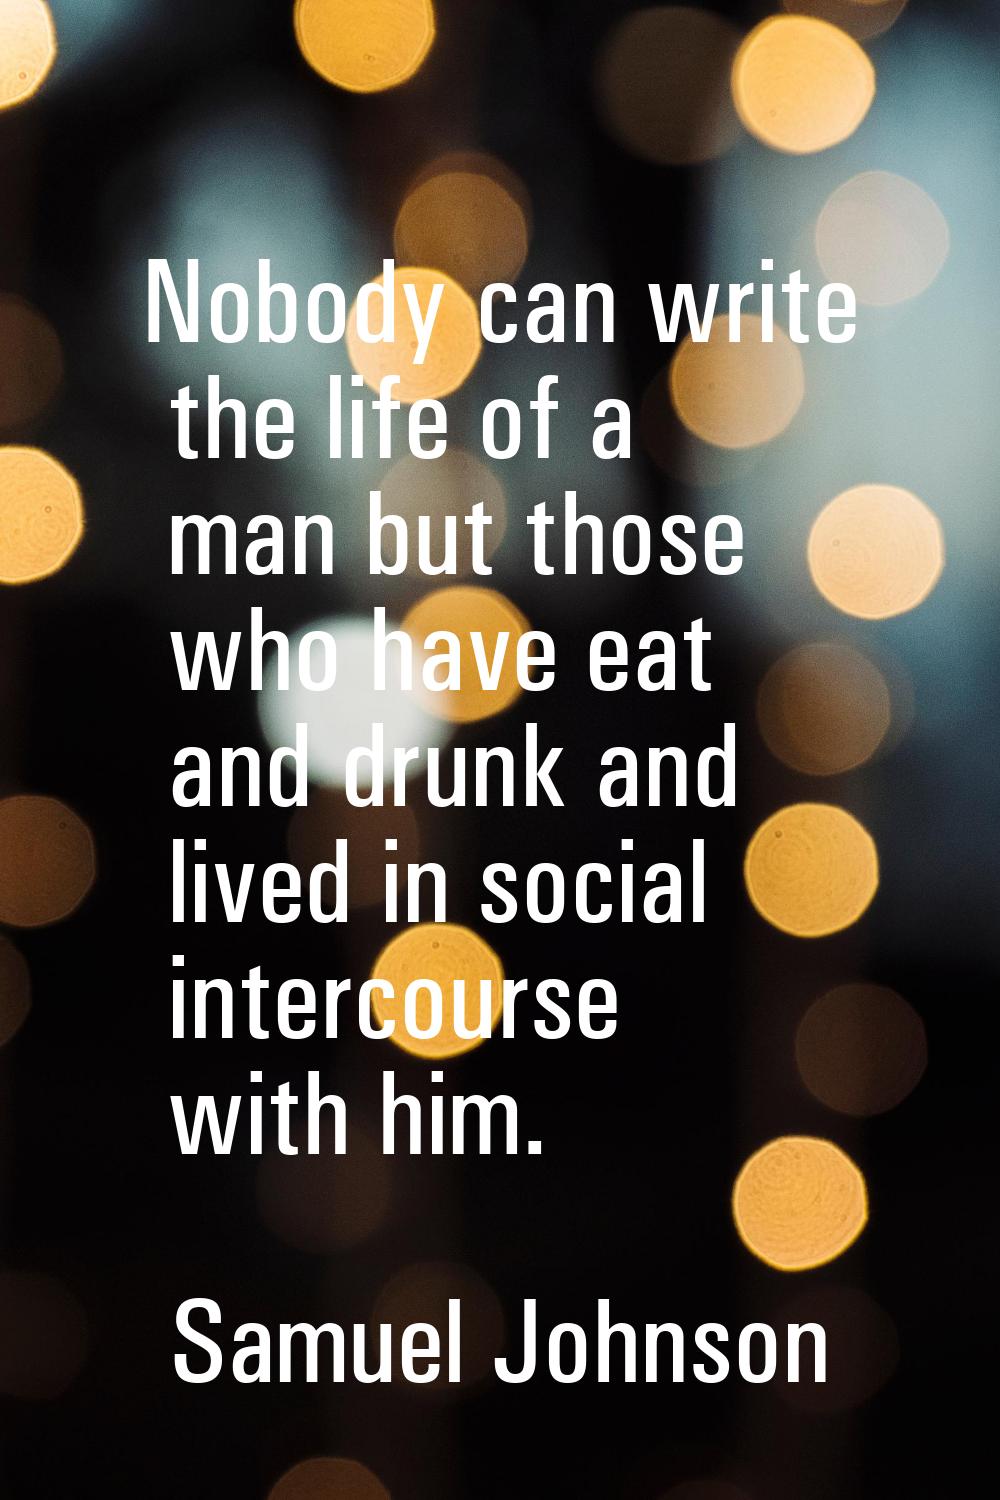 Nobody can write the life of a man but those who have eat and drunk and lived in social intercourse